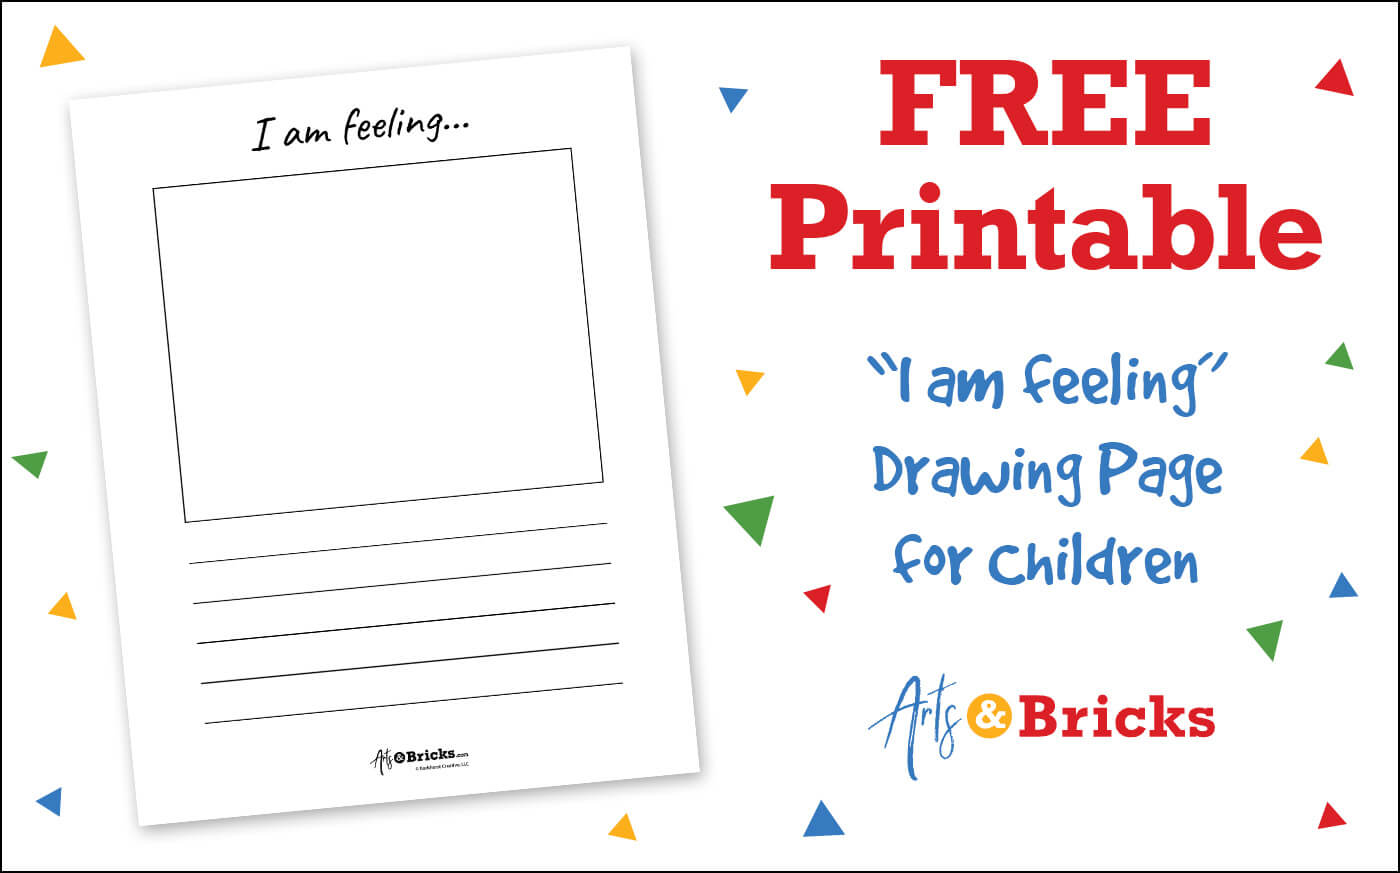 Download your FREE PRINTABLE "I am feeling" drawing page for children from ArtsandBricks.com